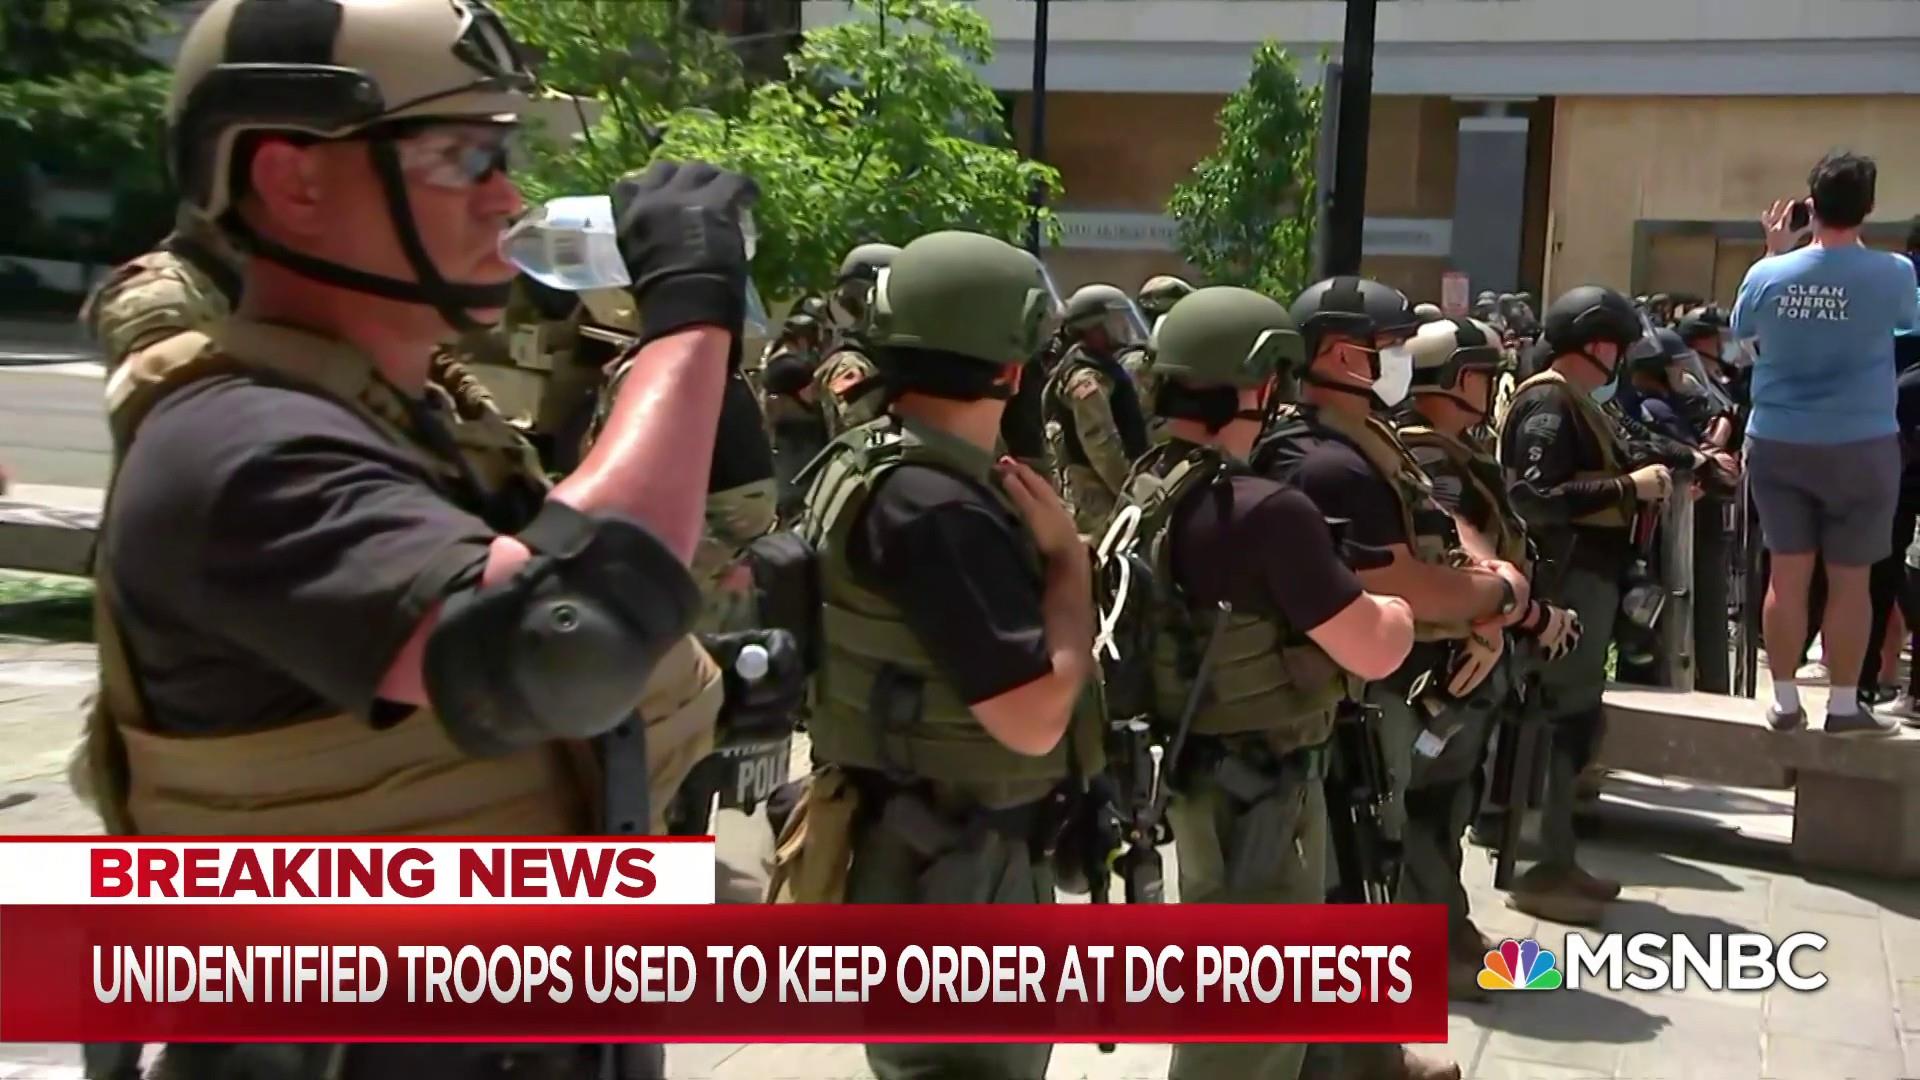 Unidentified, armed federal troops raise accountability concerns